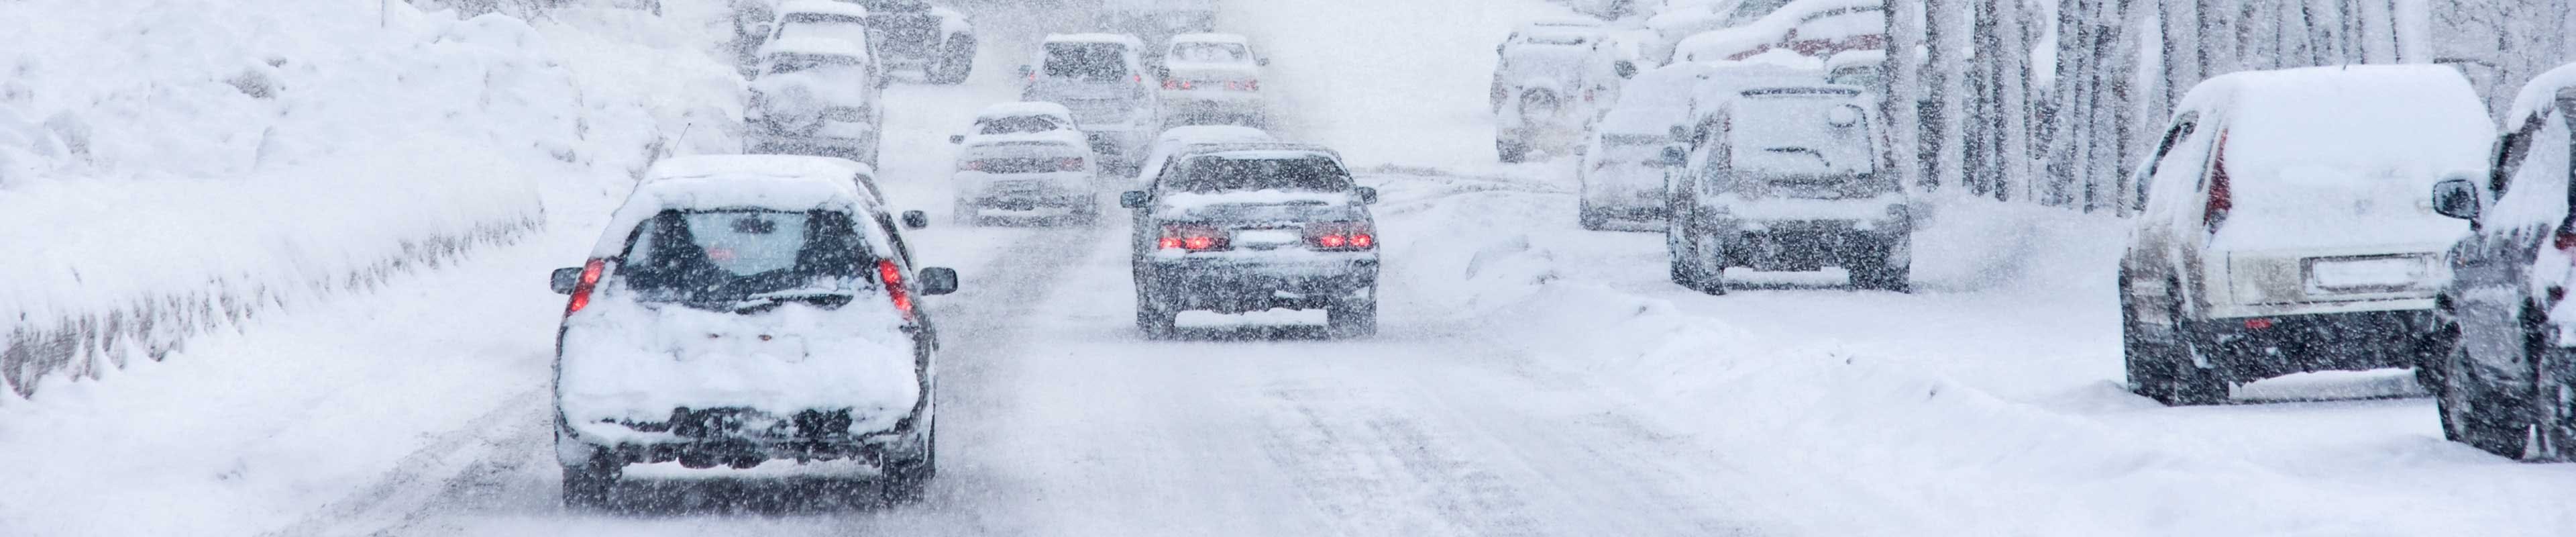 cars driving in snowy winter conditions